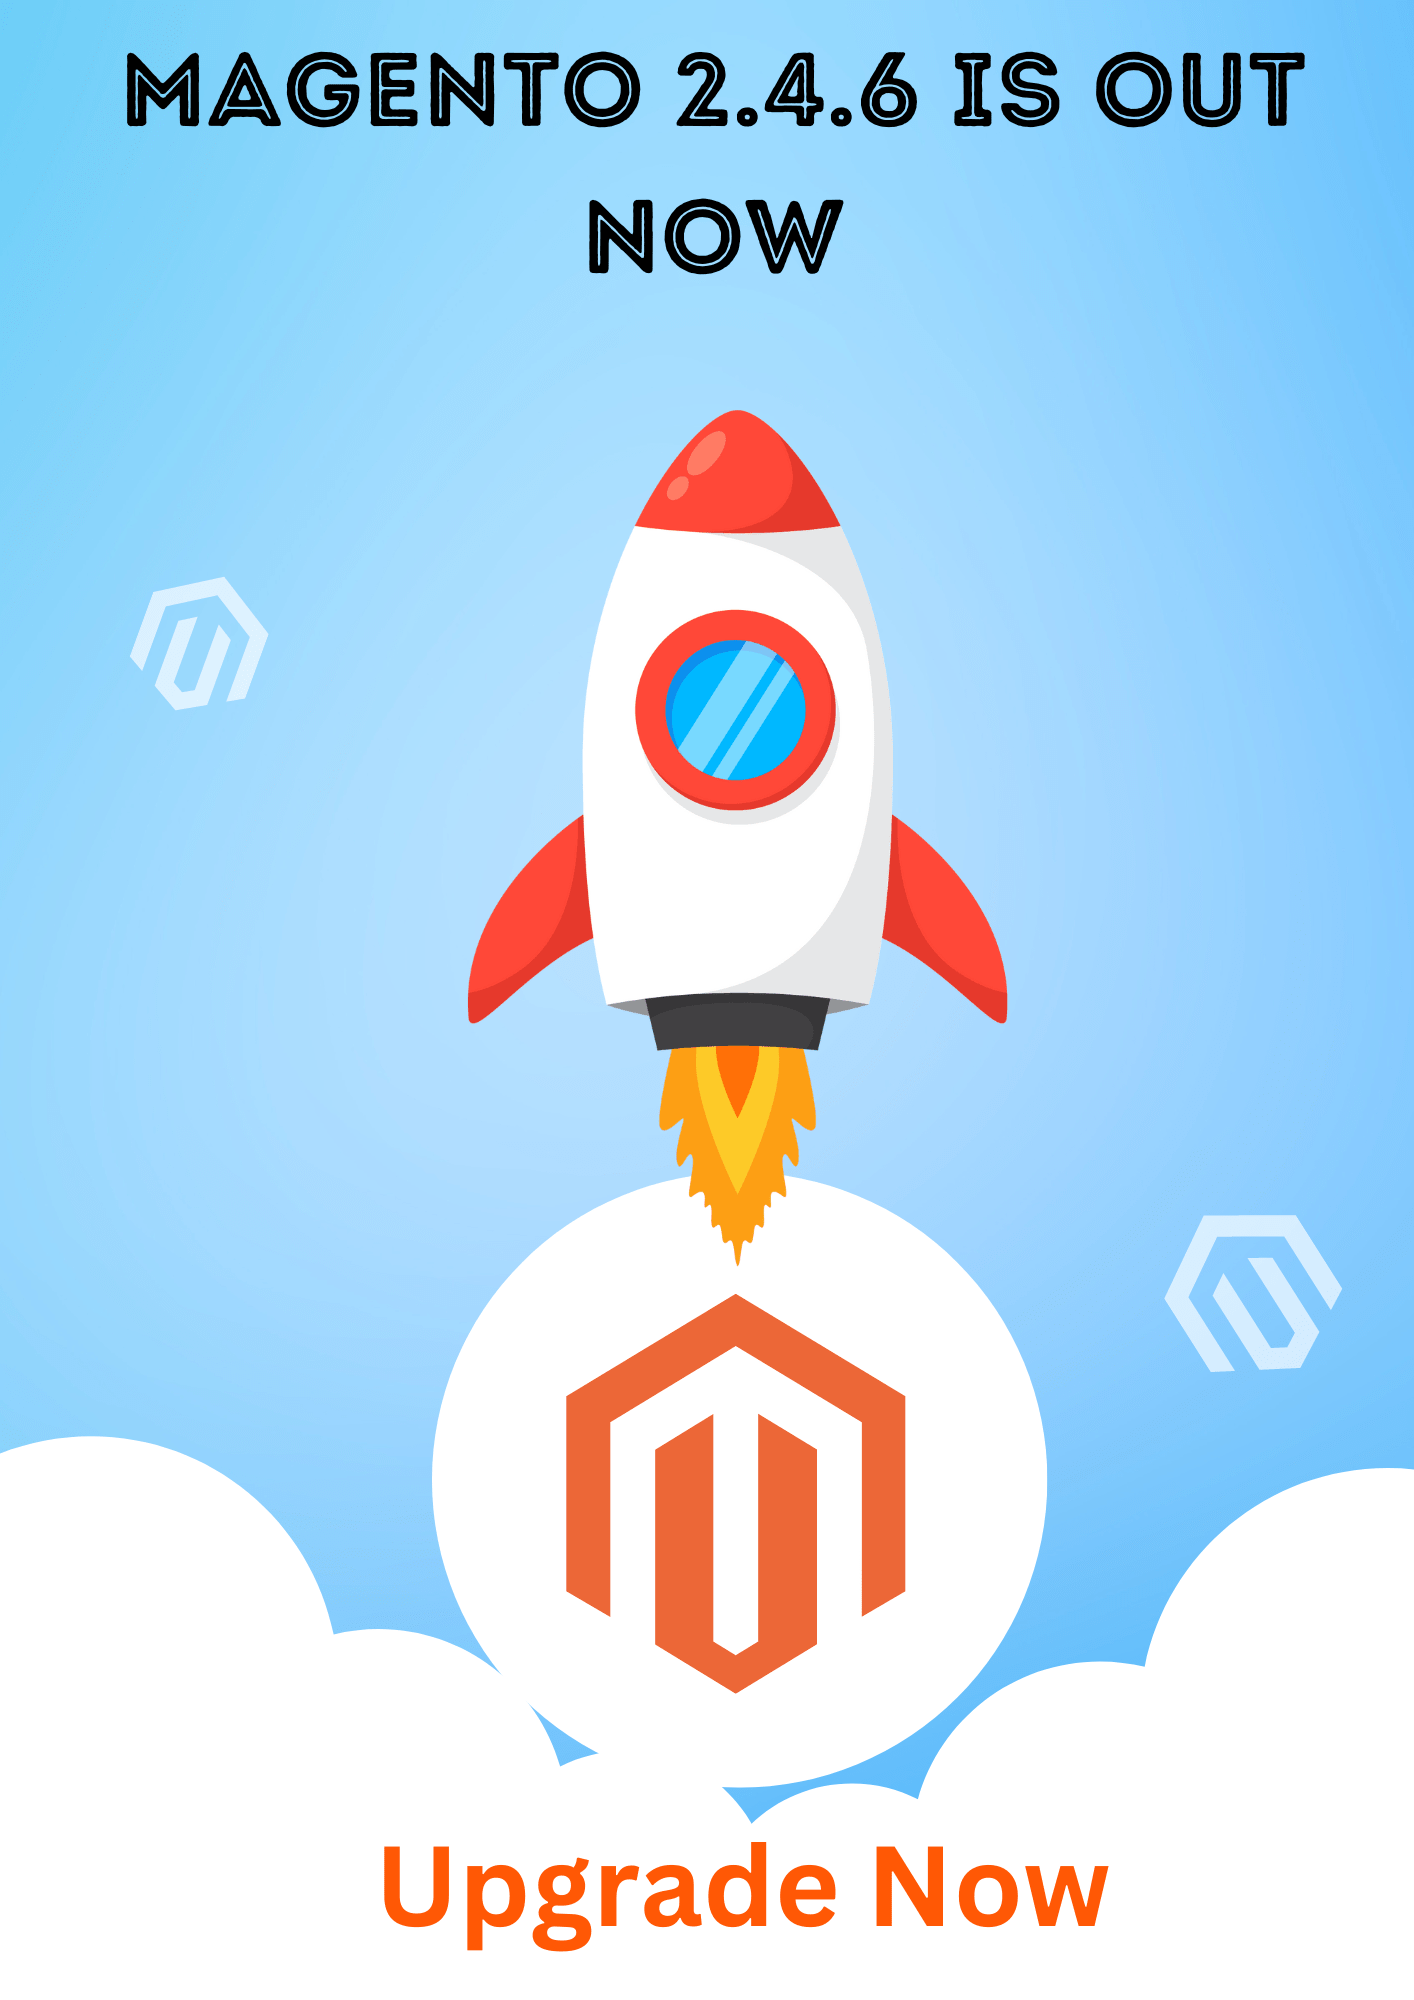 Magento 2.4.6 is out now